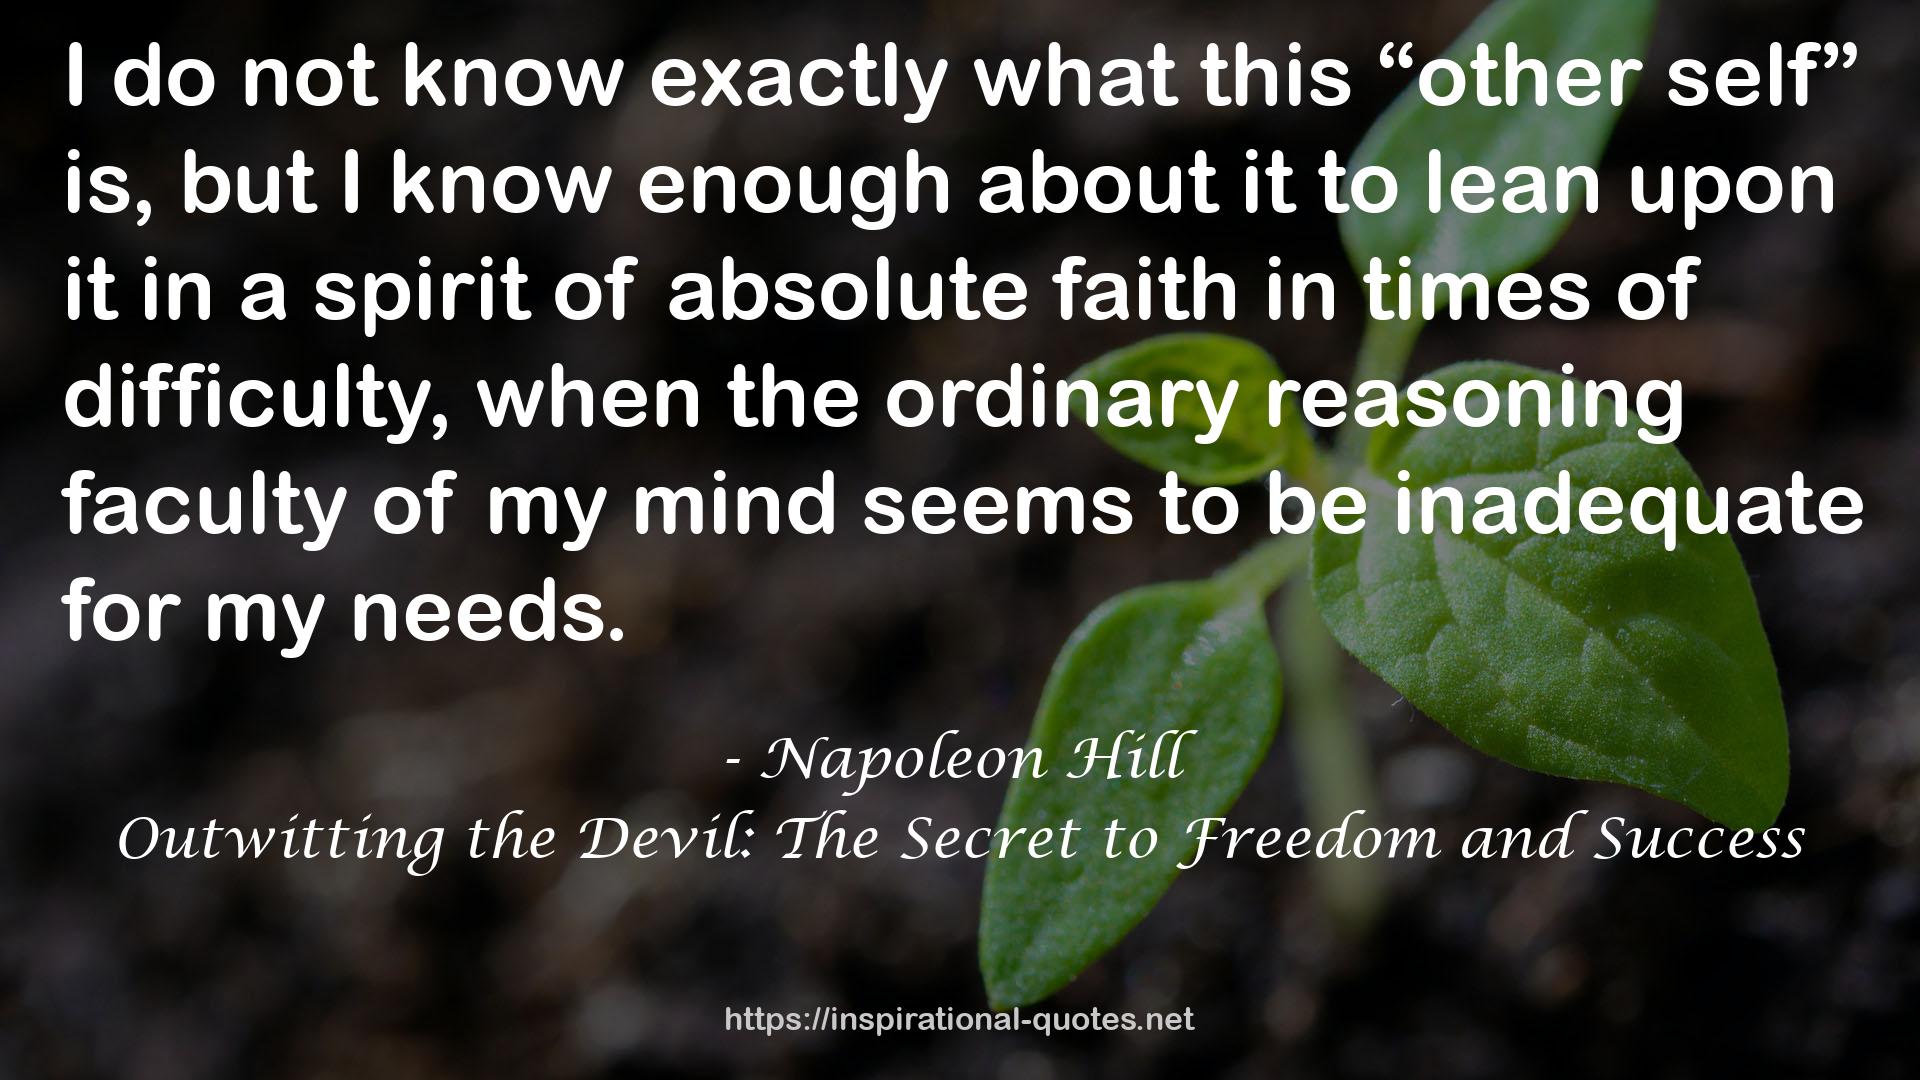 Outwitting the Devil: The Secret to Freedom and Success QUOTES